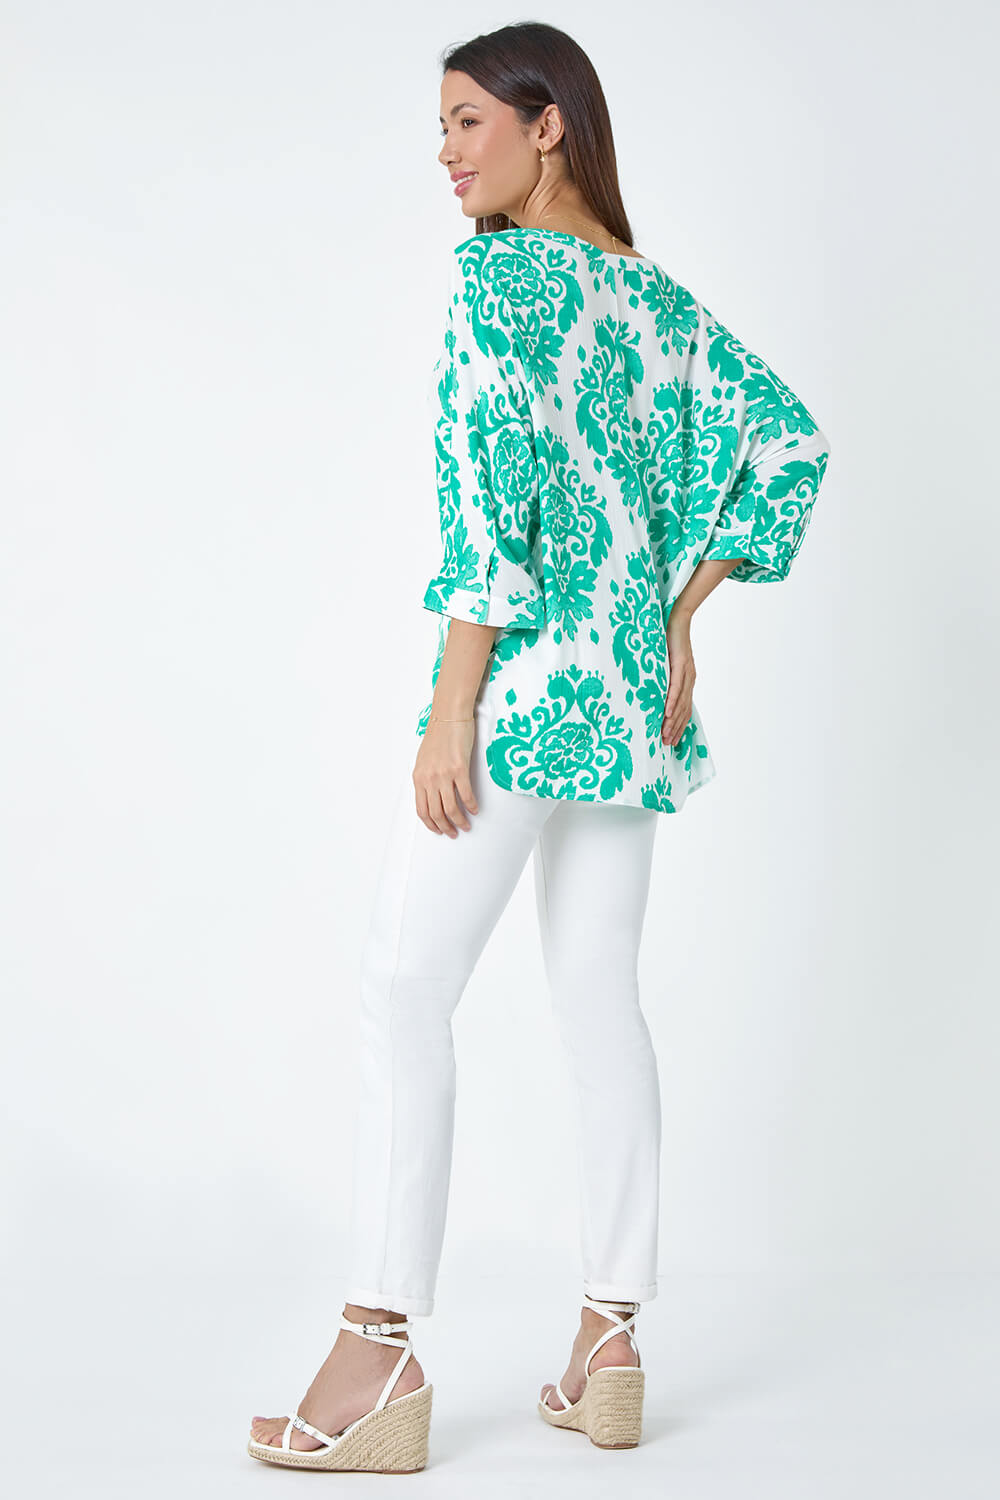 Green Textured Paisley Print Tunic Top, Image 3 of 5